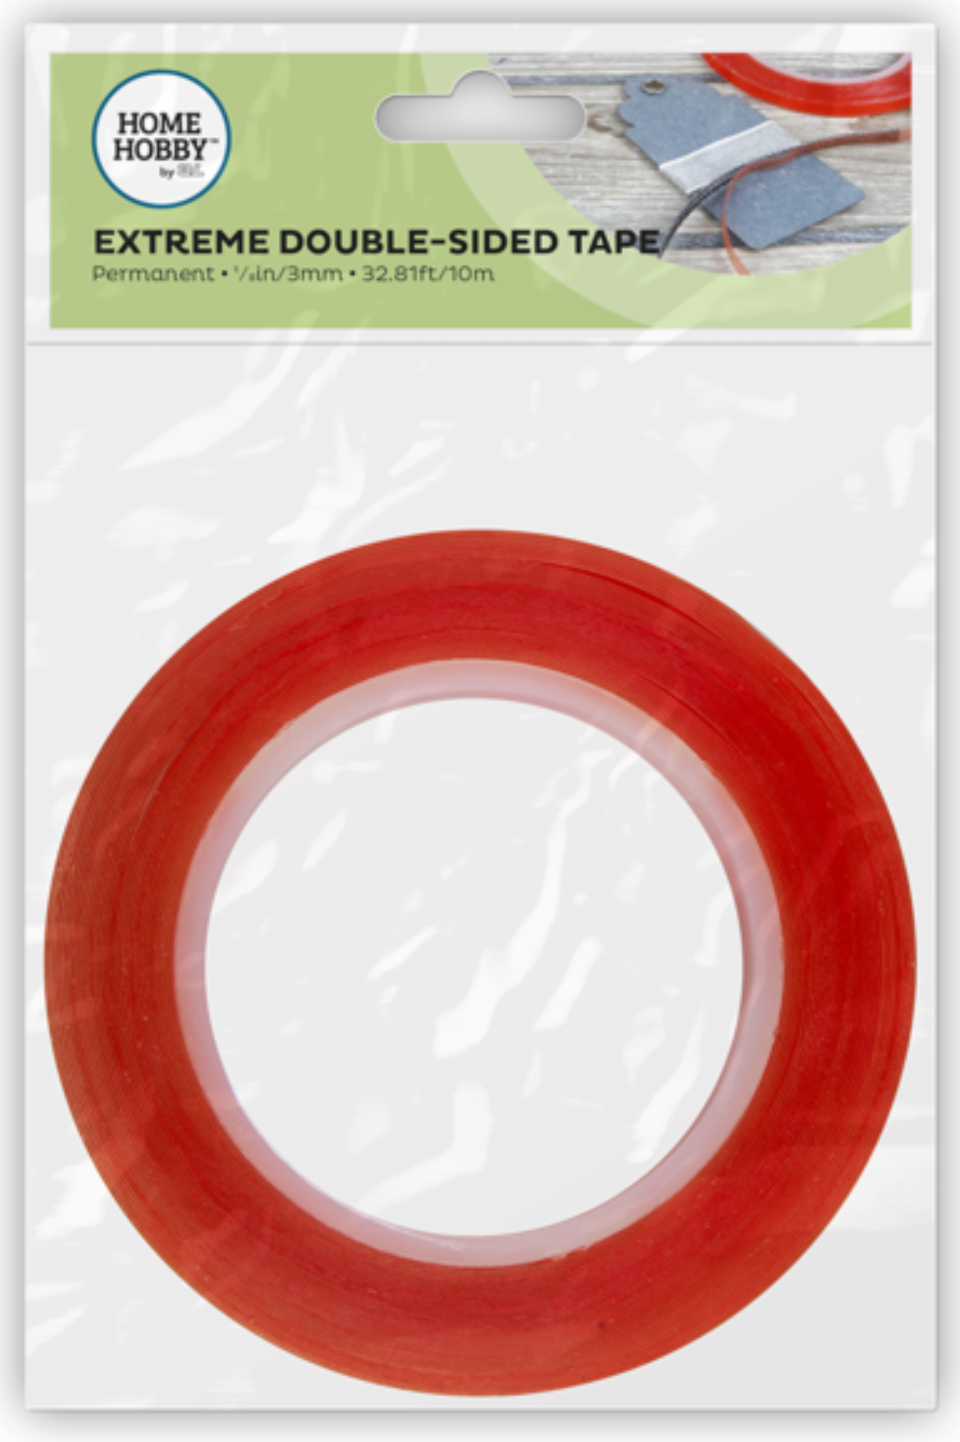 Extreme Double-Sided Tape 1/8 inch